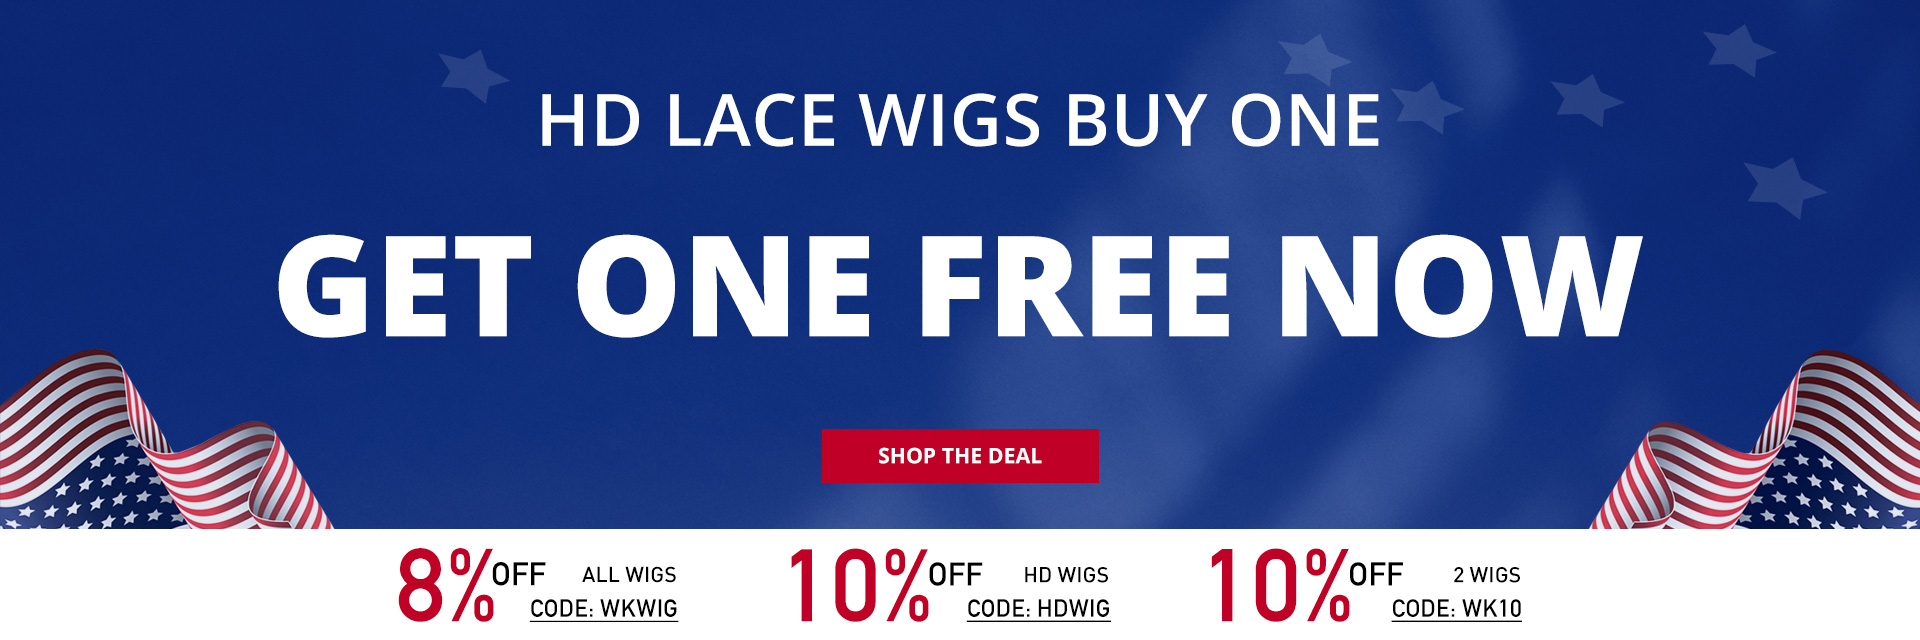 West kiss hair store offers curly lace front wigs on sale  